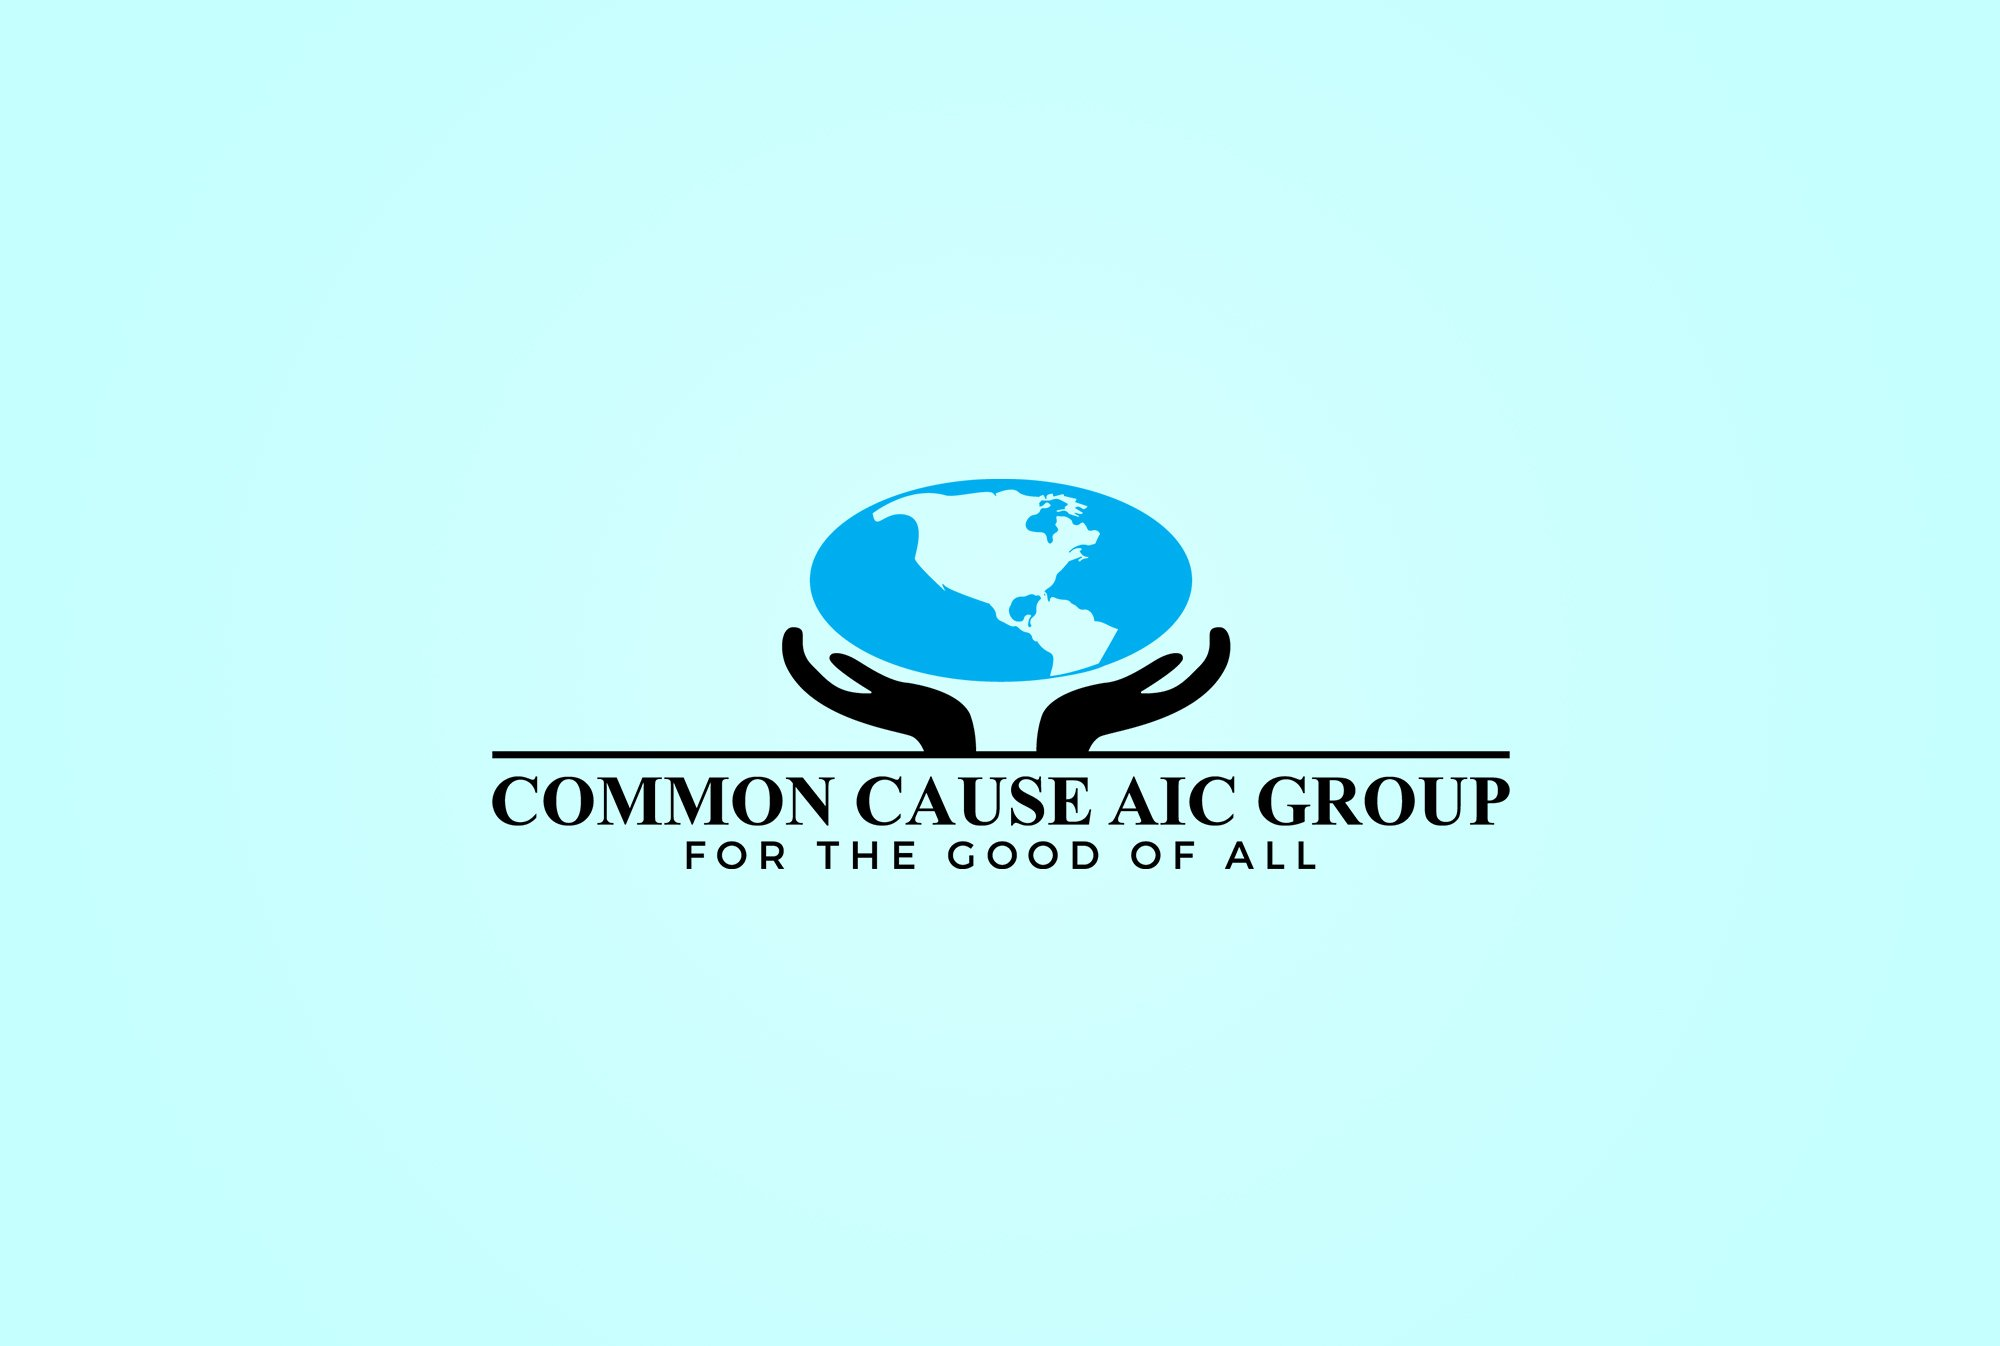  COMMON CAUSE AIC GROUP FOR THE GOOD OF ALL